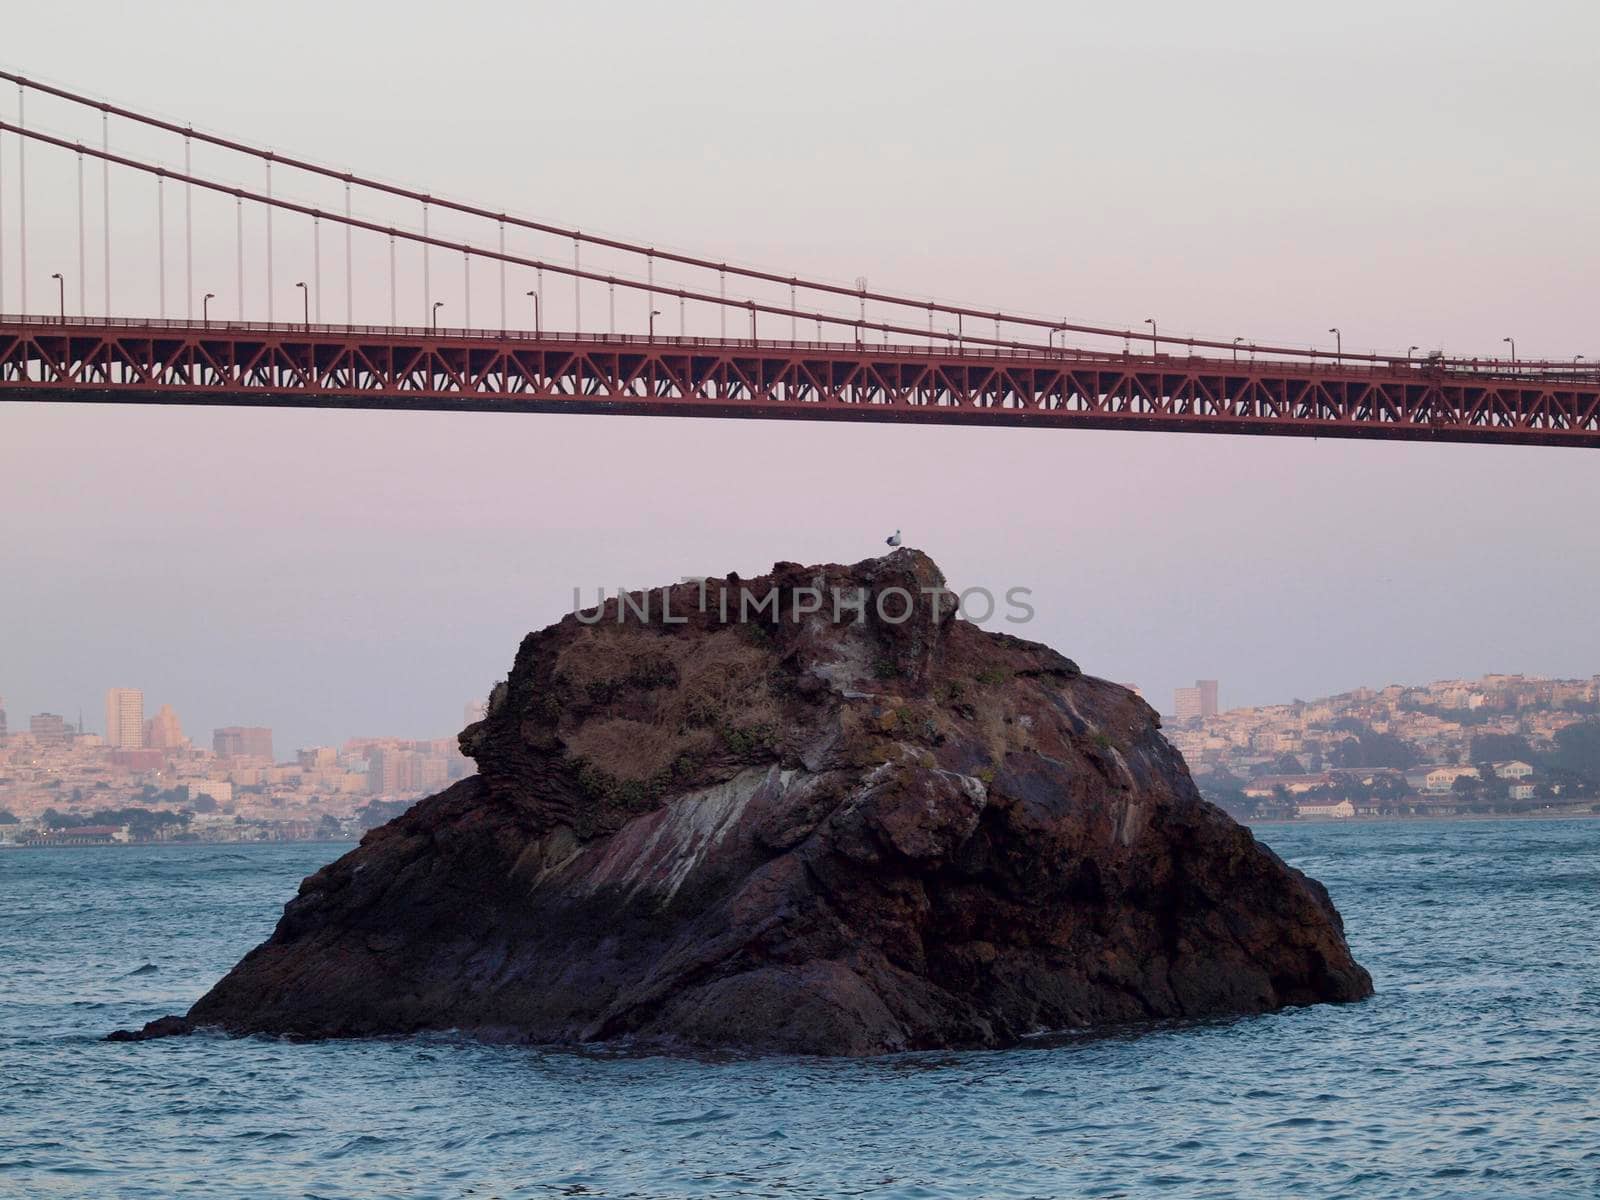 Seagull rest on rock under Golden Gate Bridge with San Francisco Cityscape, taken from the Marin Headlands hills.